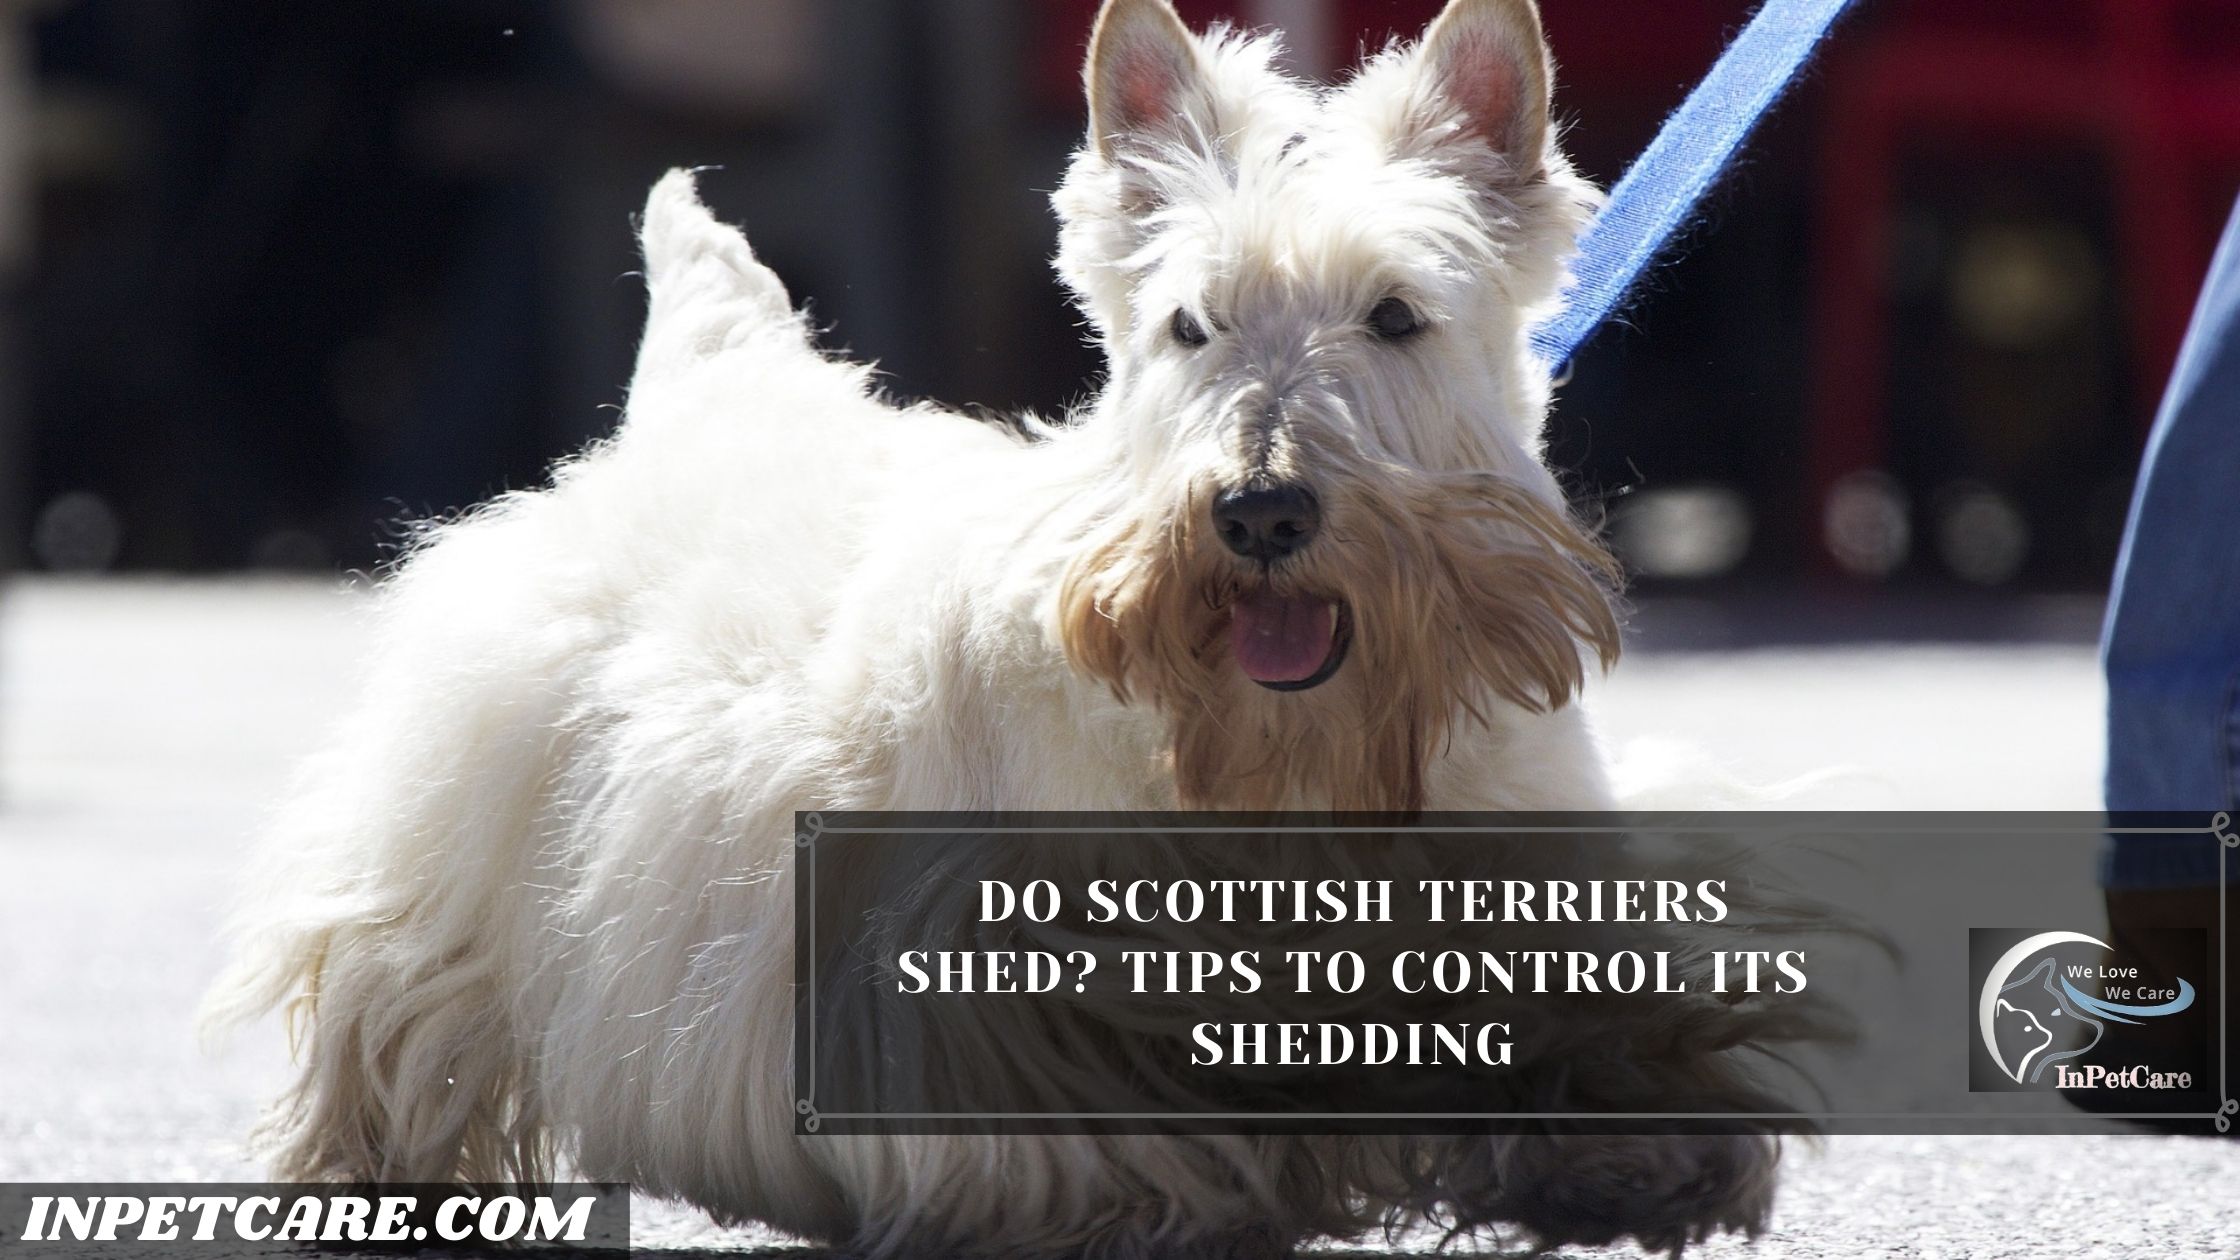 Do Scottish Terriers Shed? Tips To Control Its Shedding